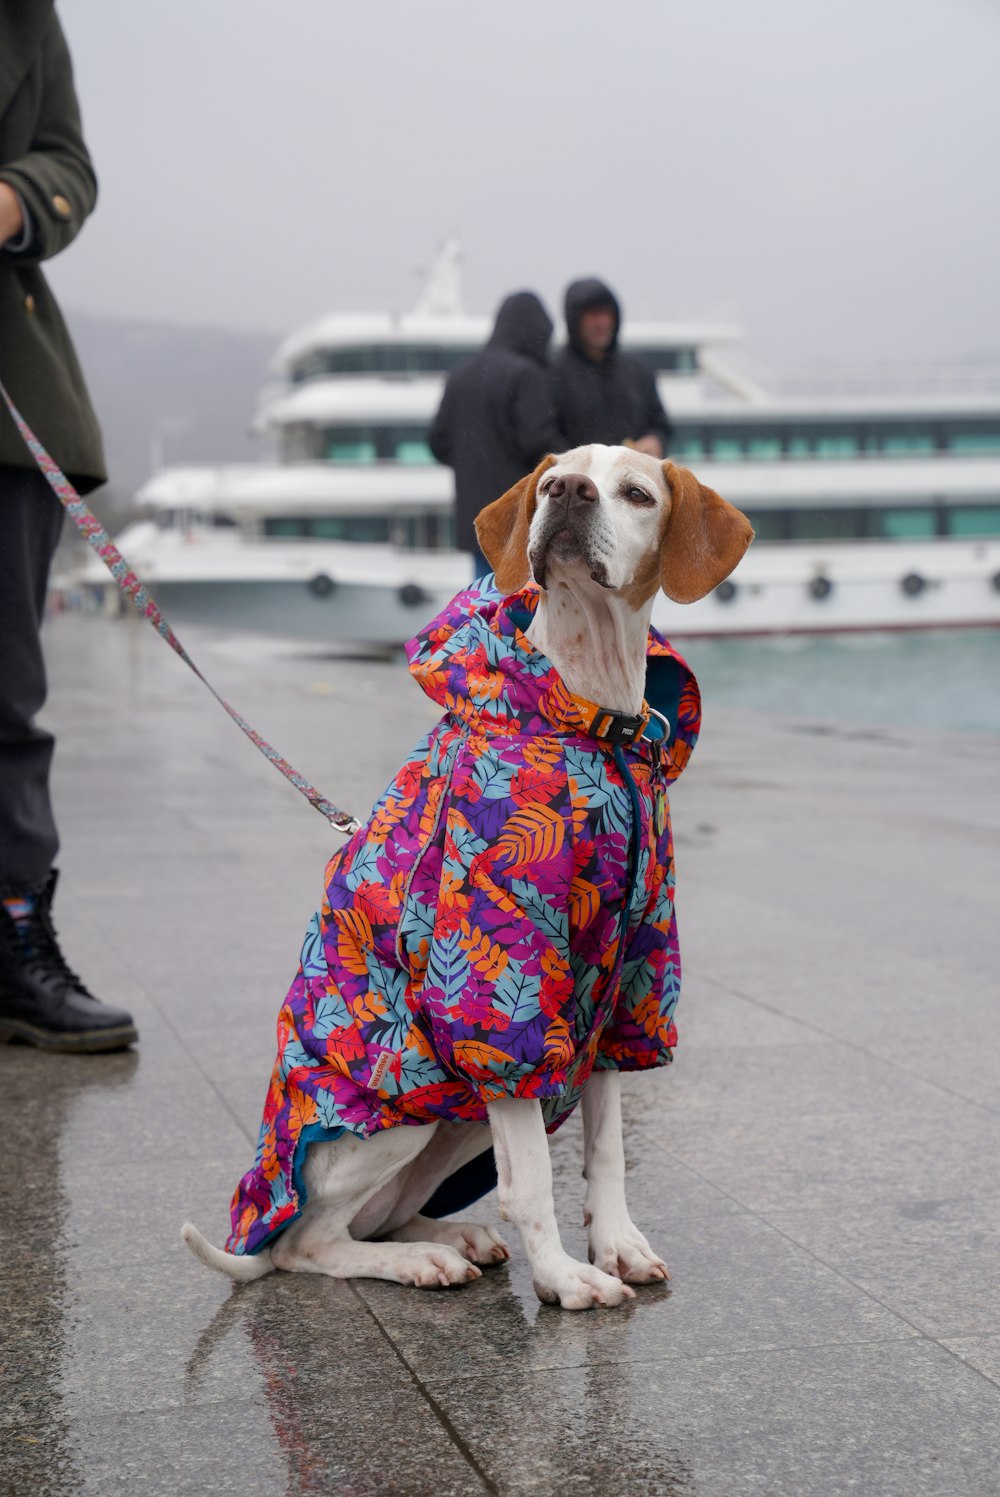 a dog wearing a colorful coat on a leash